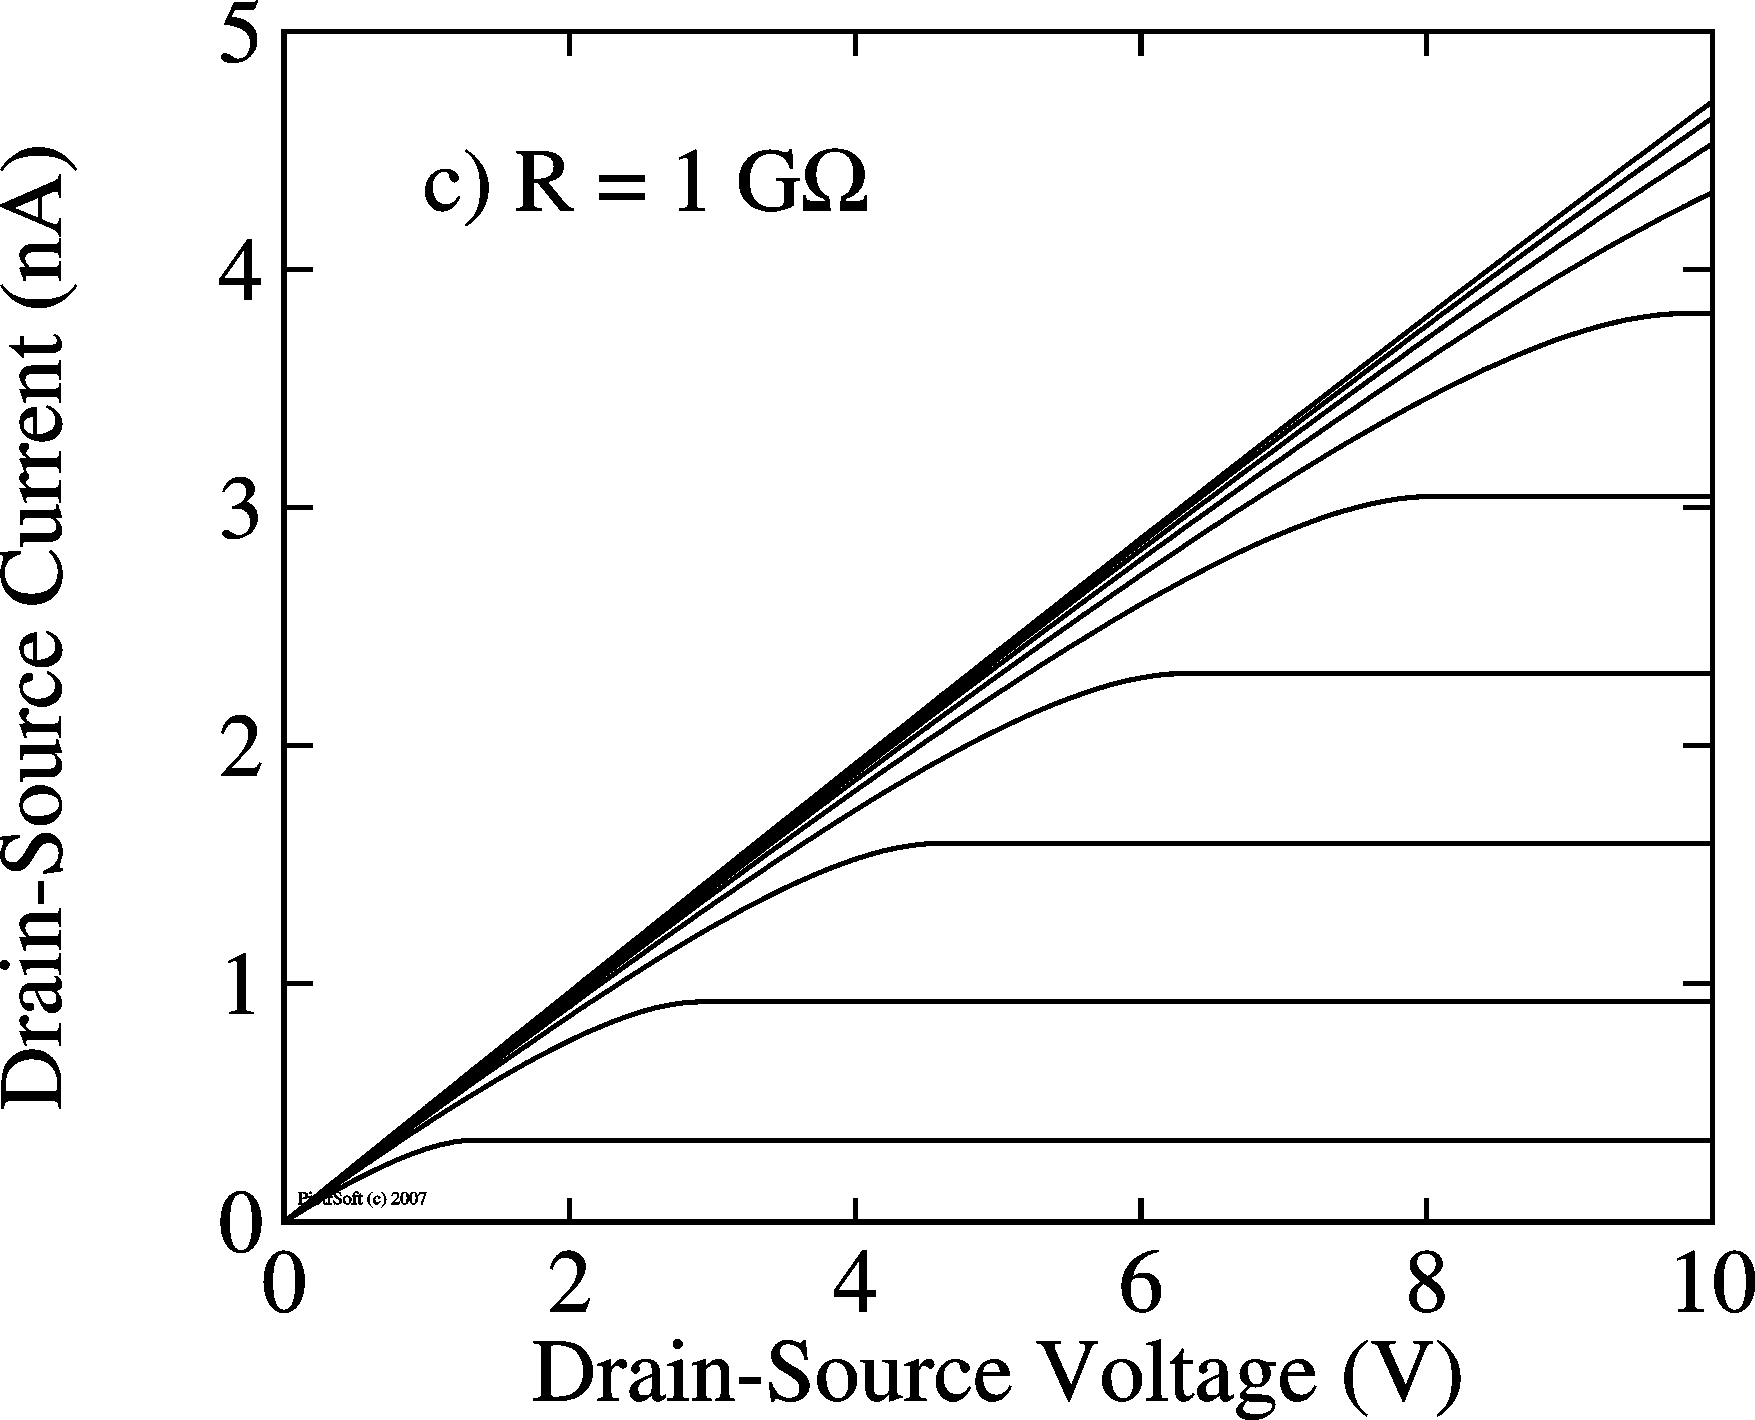 TFT IV curves with contact resistance